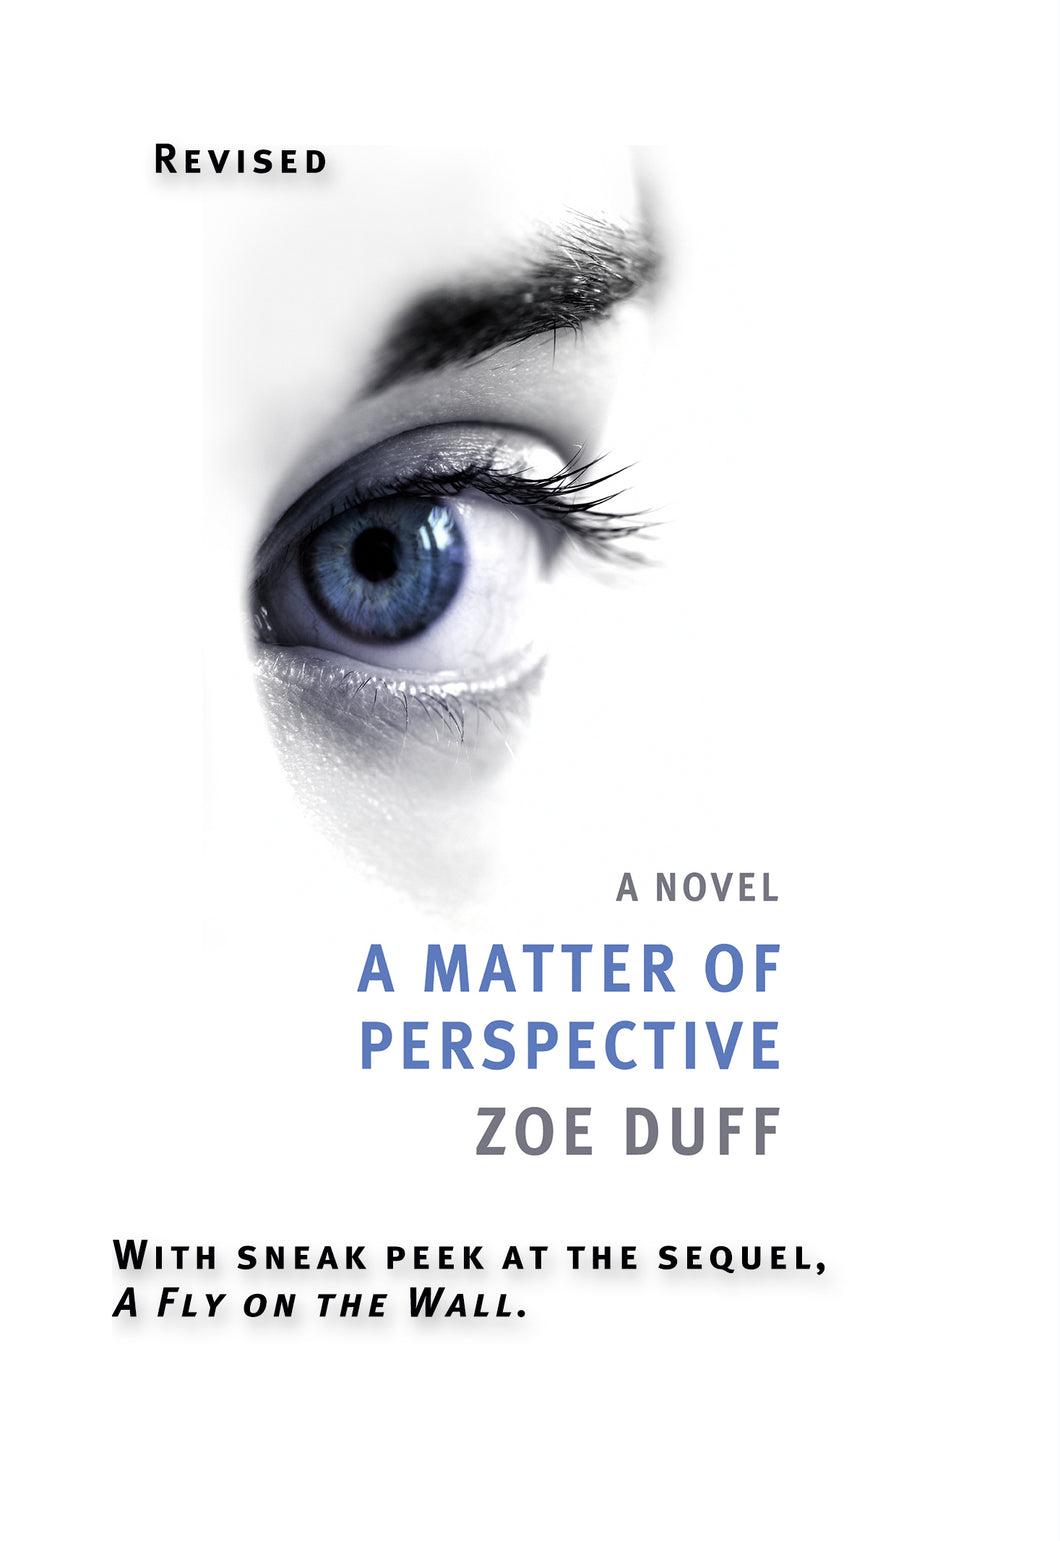 A Matter of Perspective by Zoe Duff